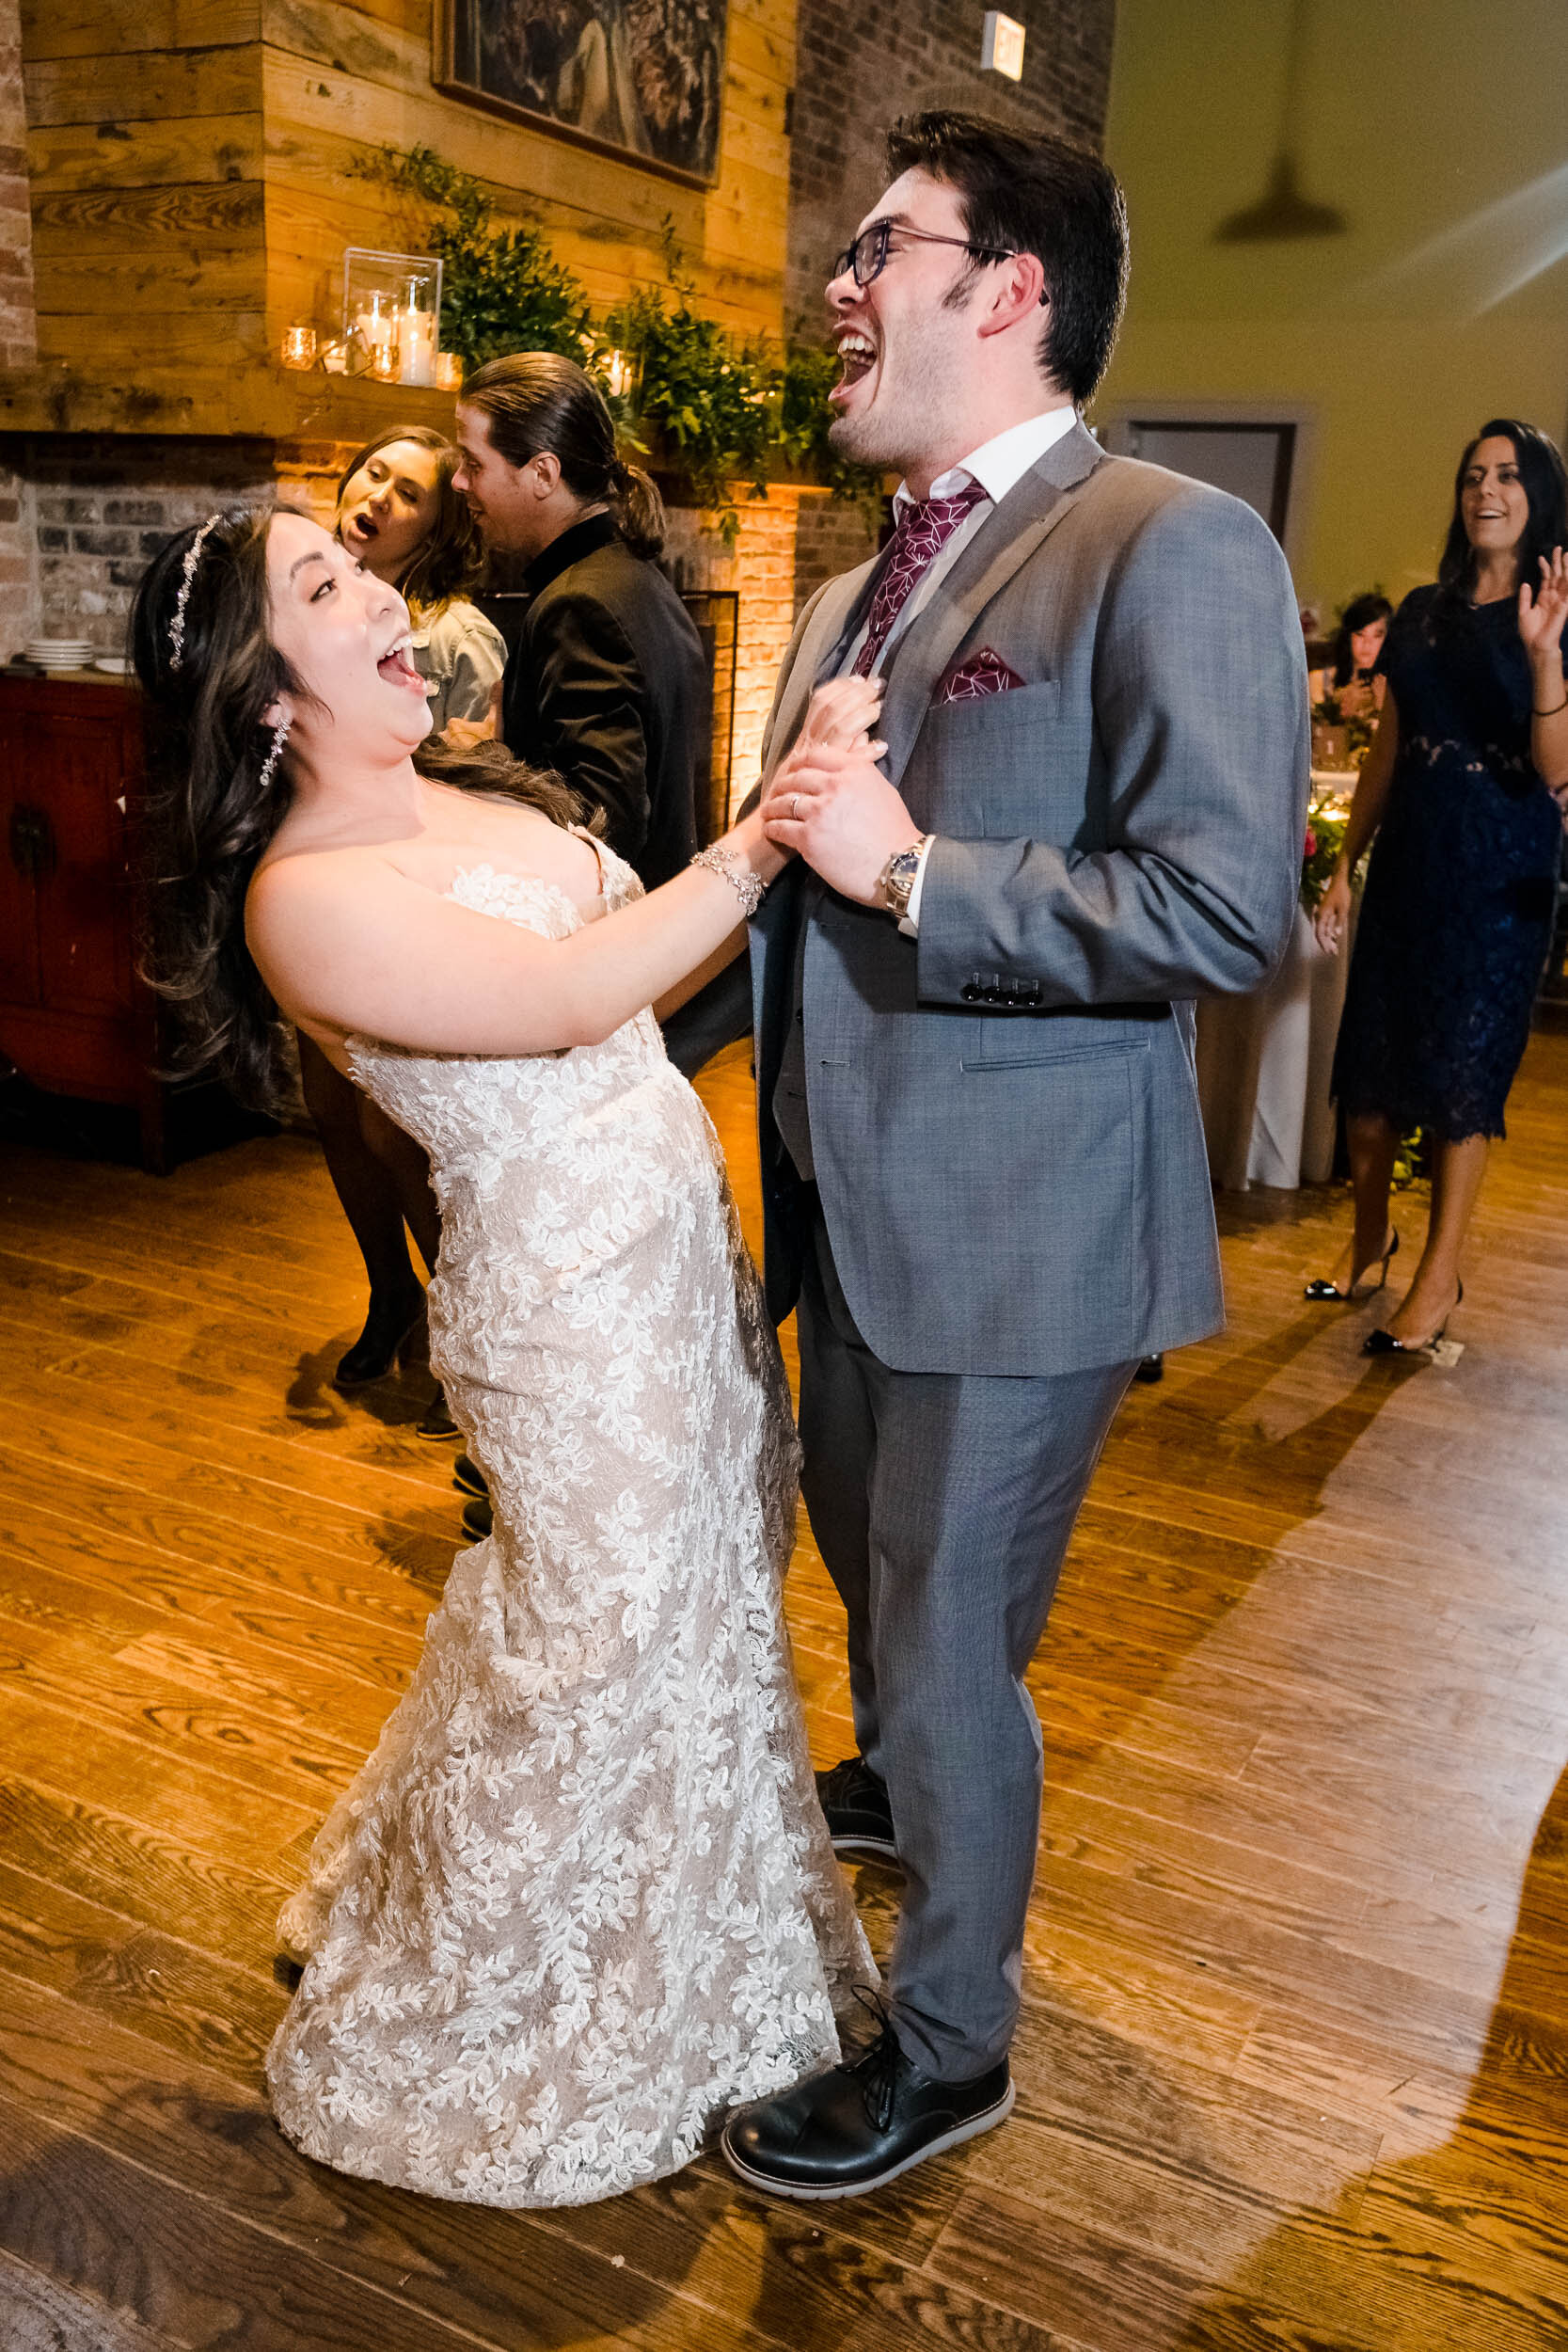 Wedding Day Photos | City Winery | J. Brown Photography | bride and groom dance during their reception.